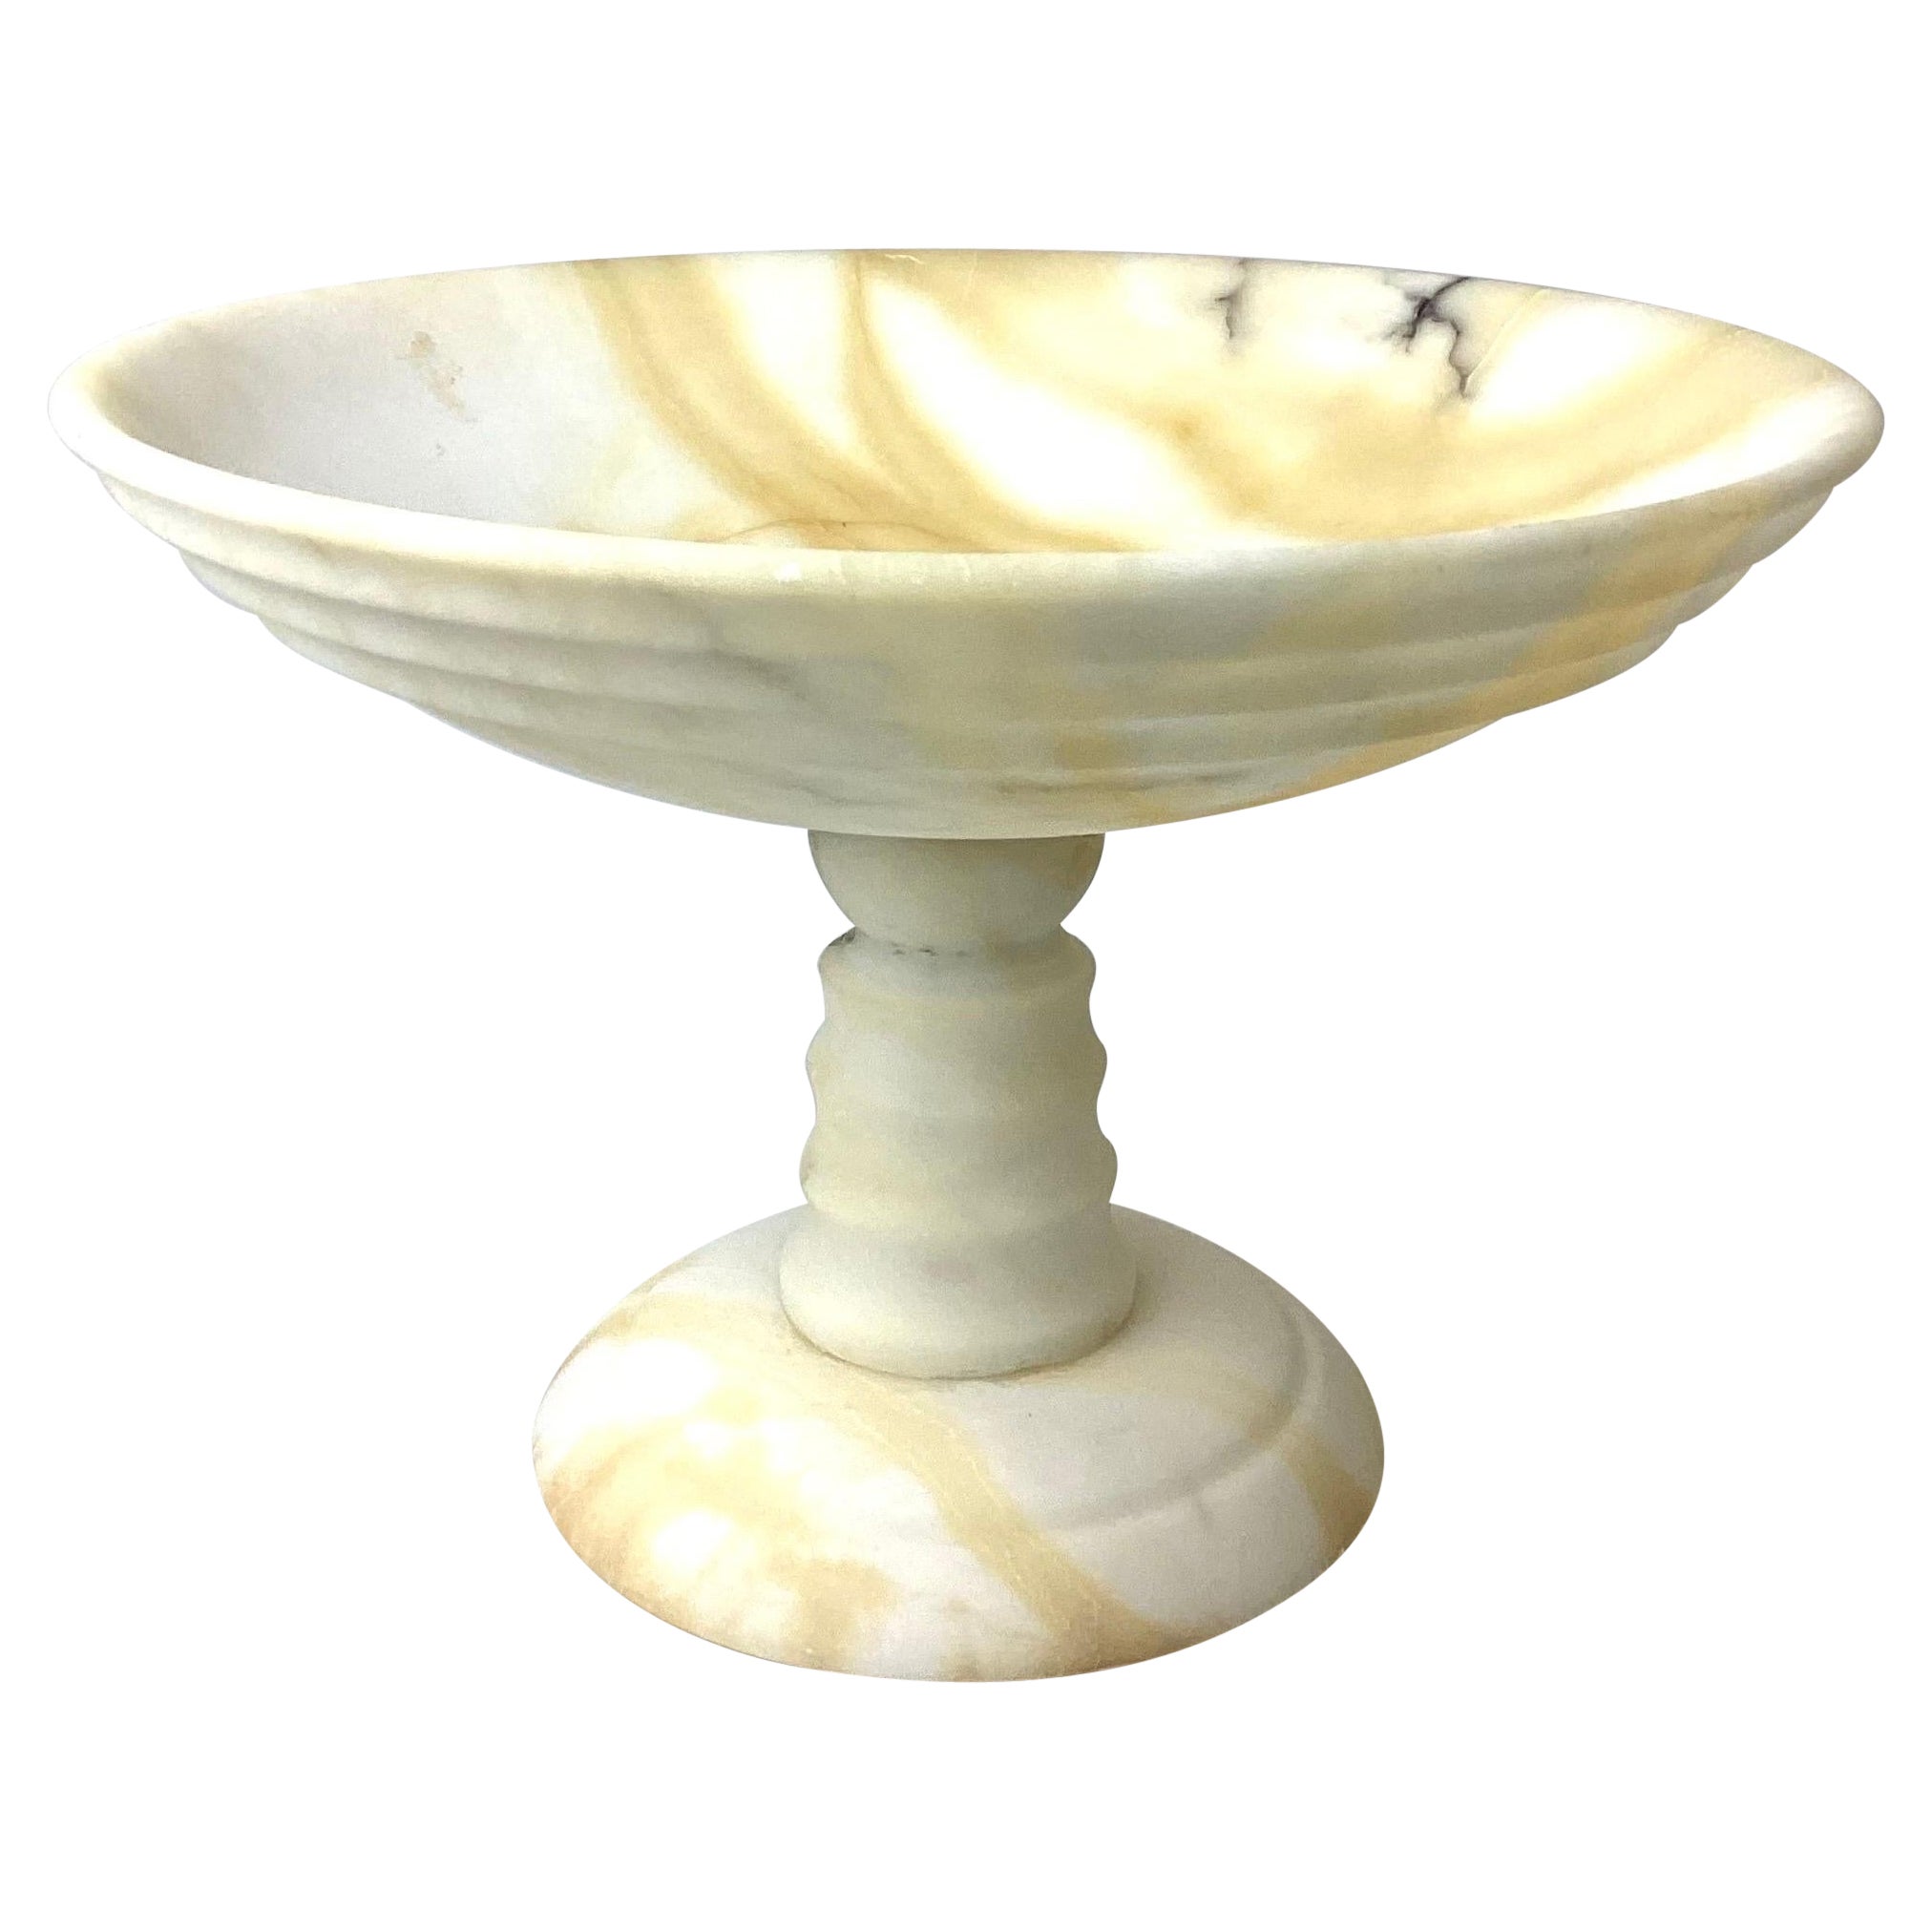 Italian White and Brown Alabaster Marble Tazza Compote Bowl For Sale